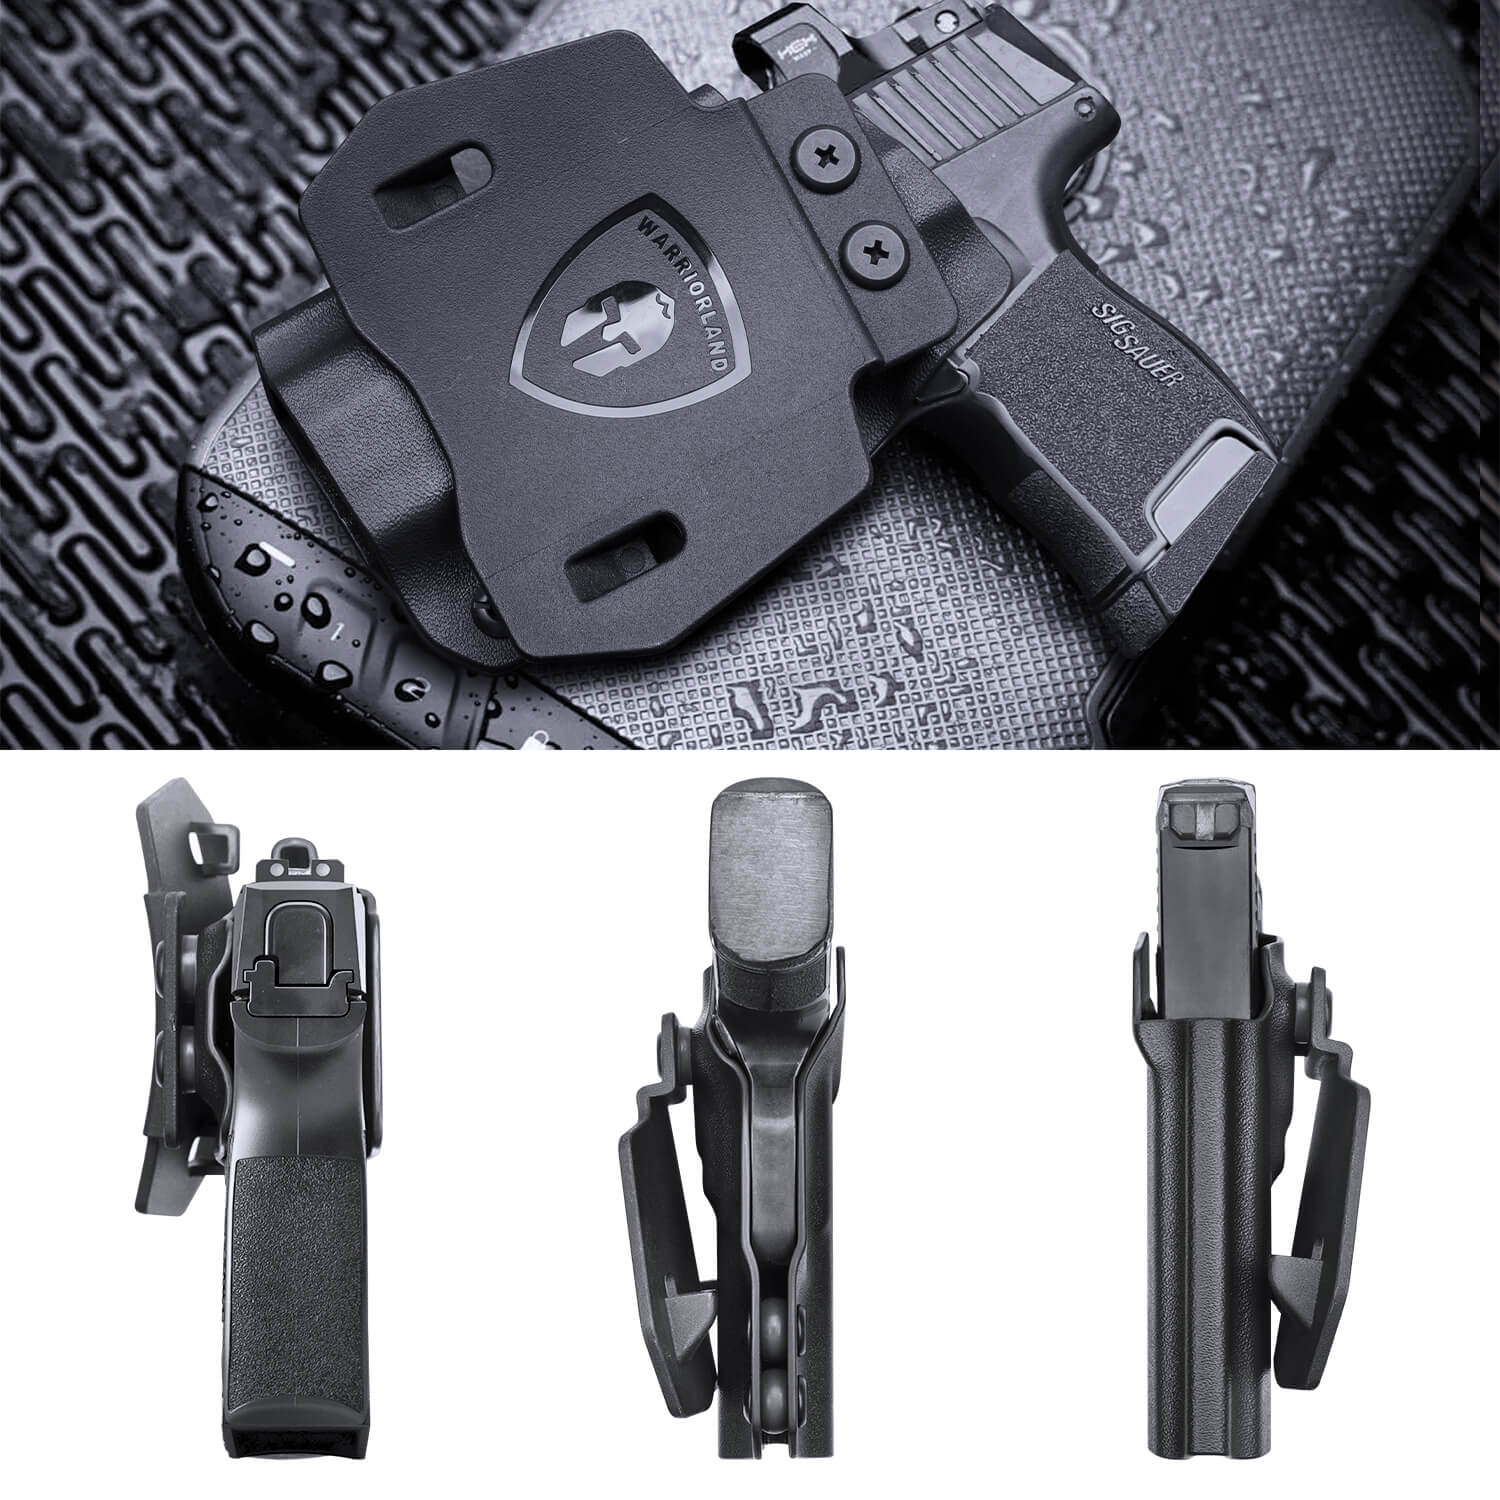 Open Carry OWB Paddle Holster Kydex for Sig Sauer P365 SAS X XL Pistol with Red Dot Trigger Guard | WARRIORLAND